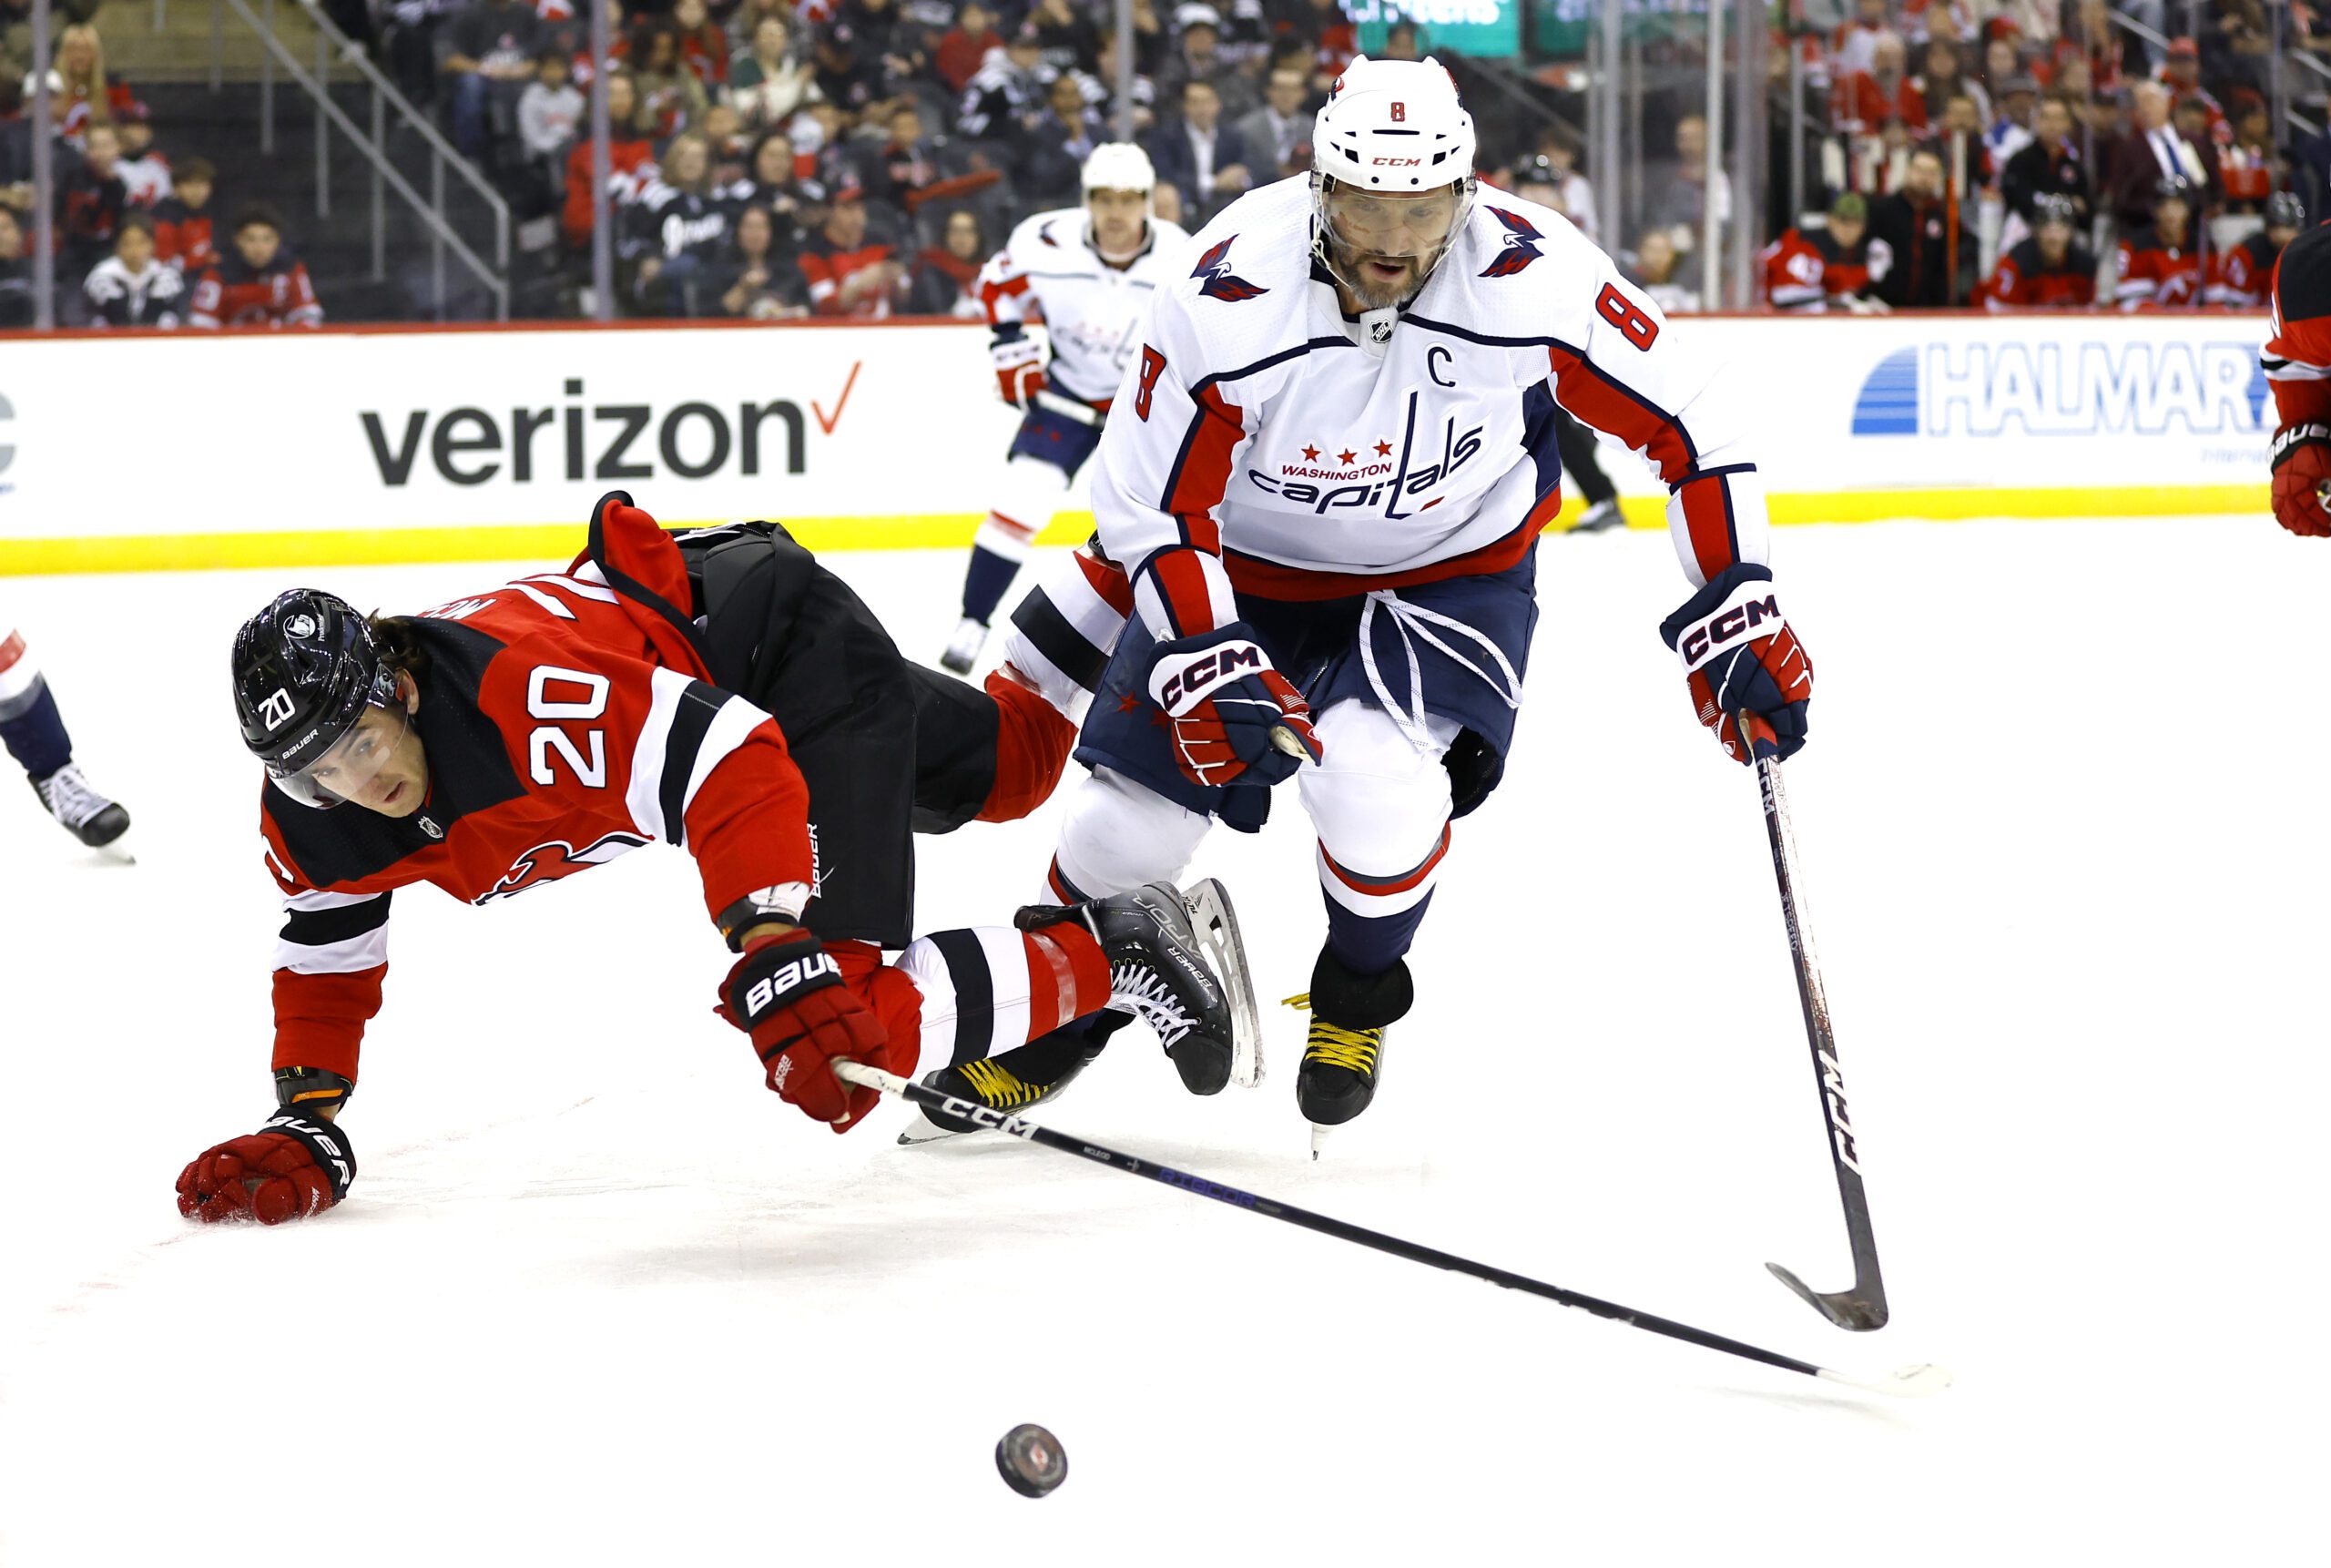 Devils Takeaways: Defense & Goaltending Continue Struggles in 4-2 Loss to Capitals